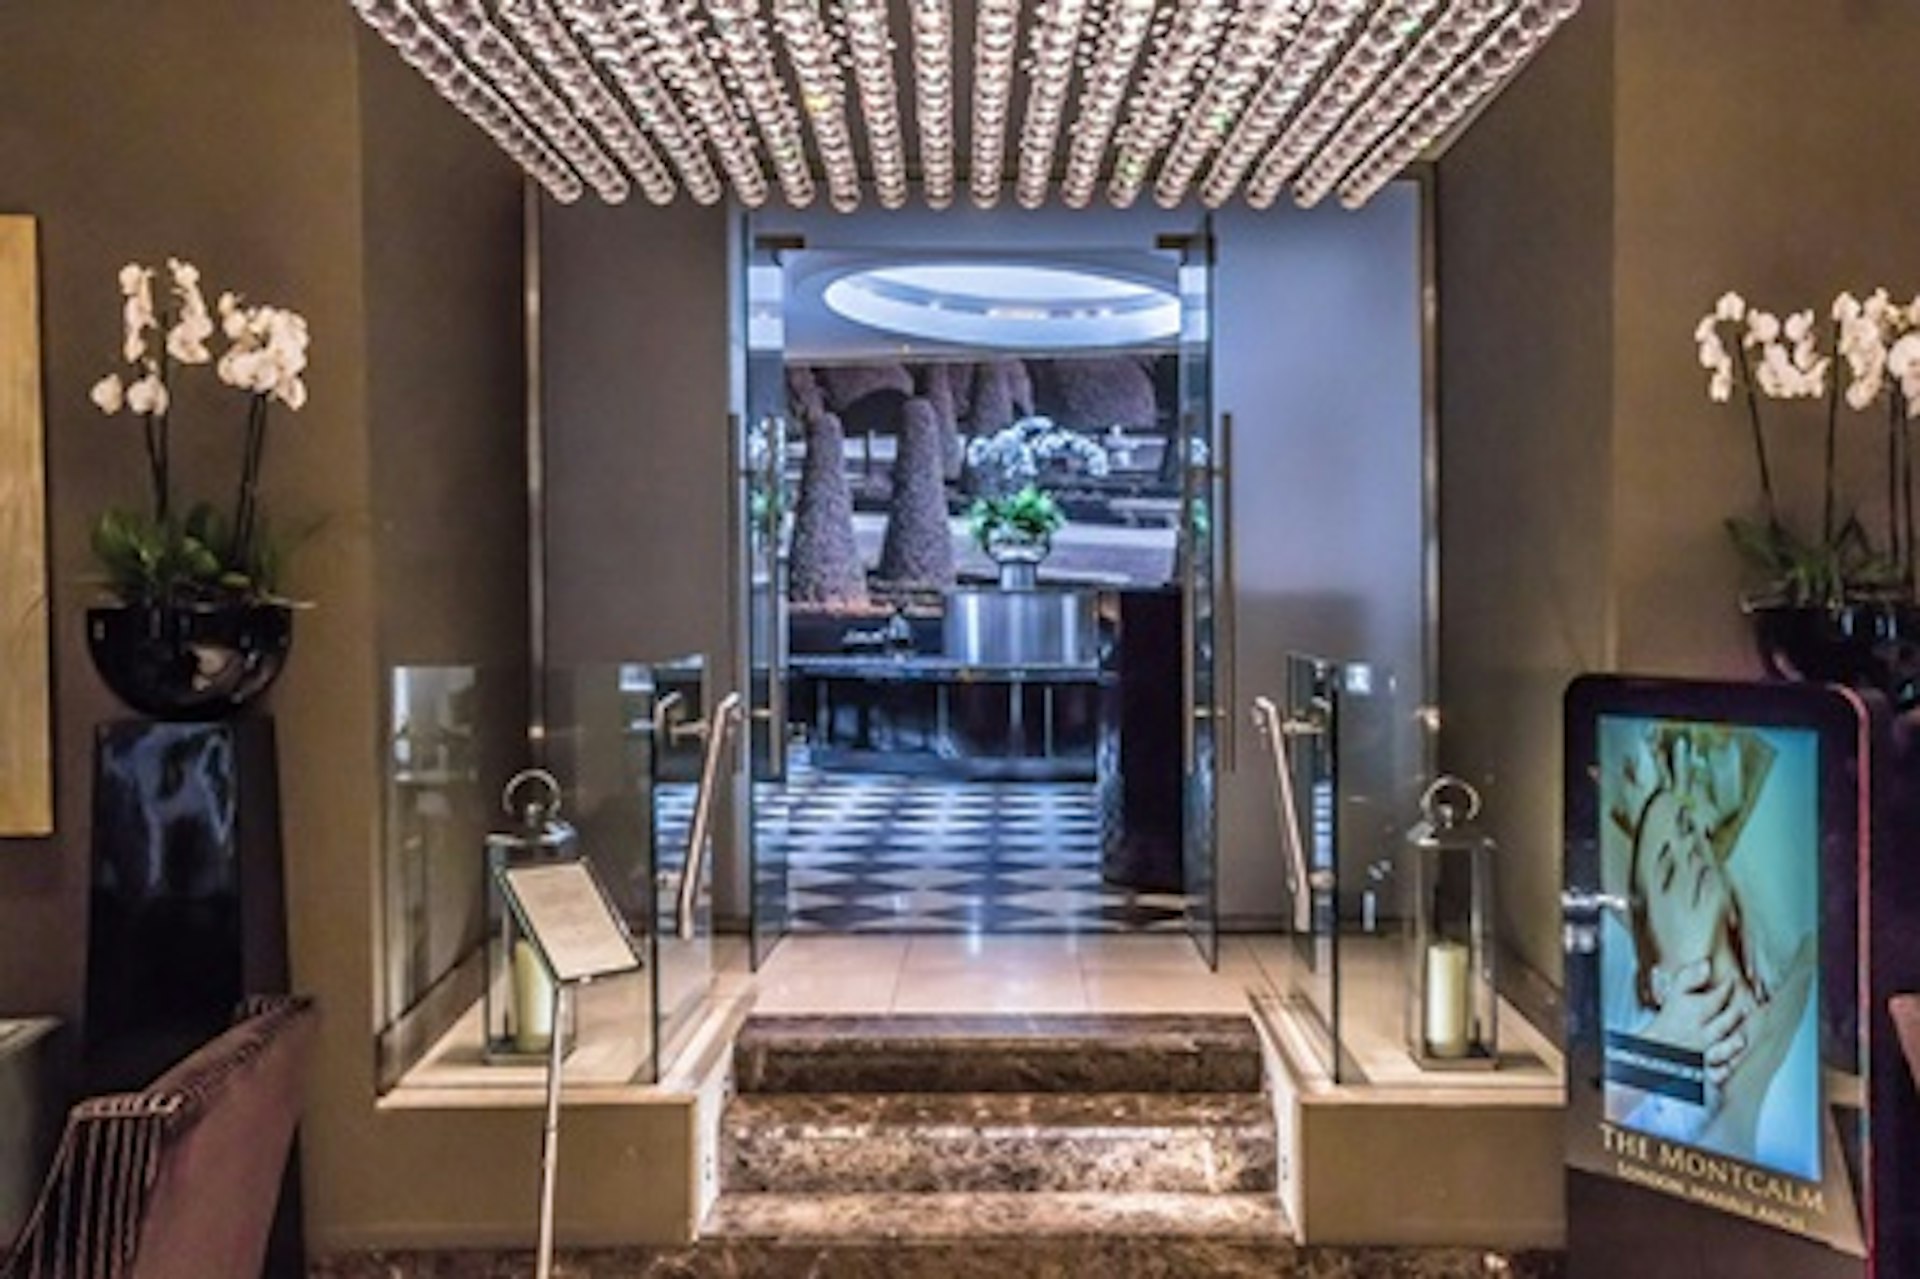 Weekday Spa Relaxation with Treatment and Prosecco for Two at the 5* Montcalm Hotel, London 4